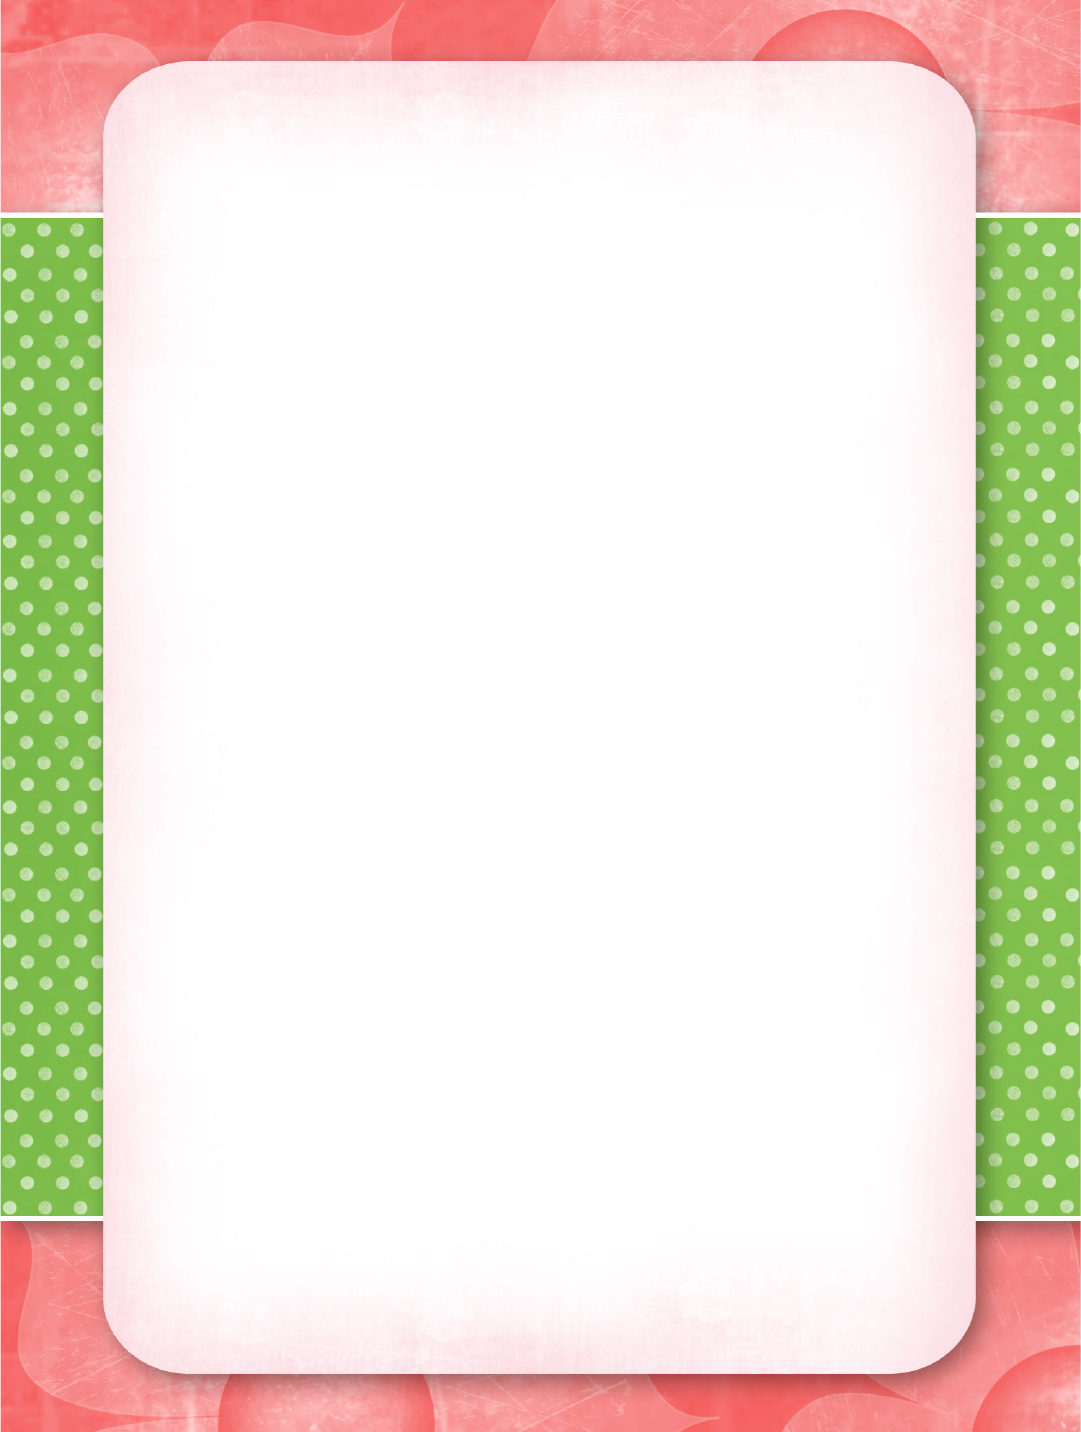 Stationery Template 2